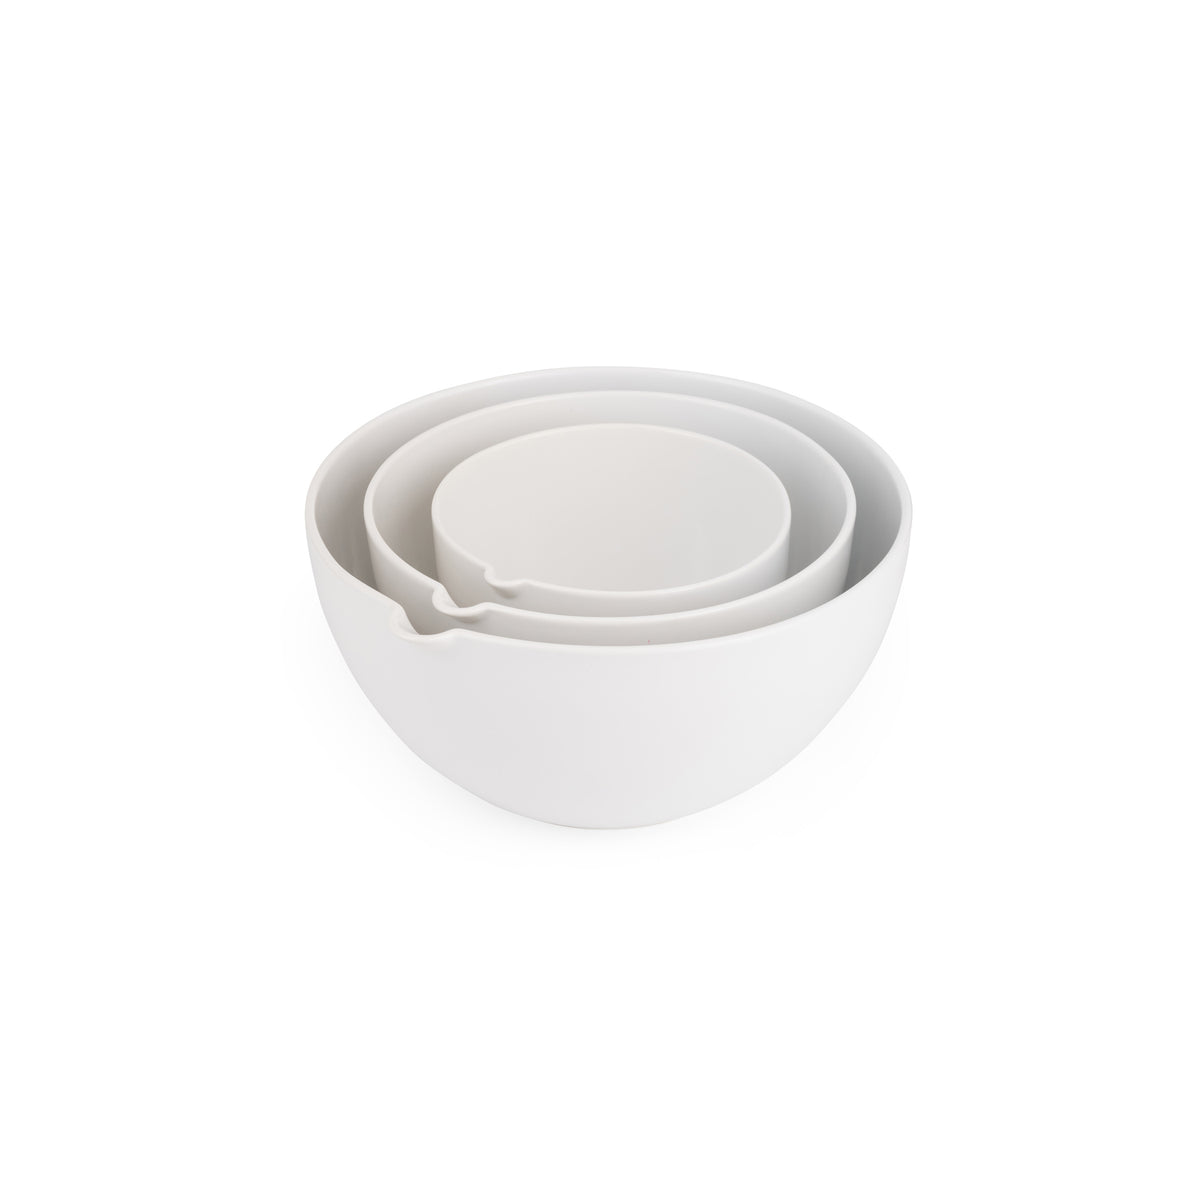 Duets Nesting Mixing Bowls - Set of 3